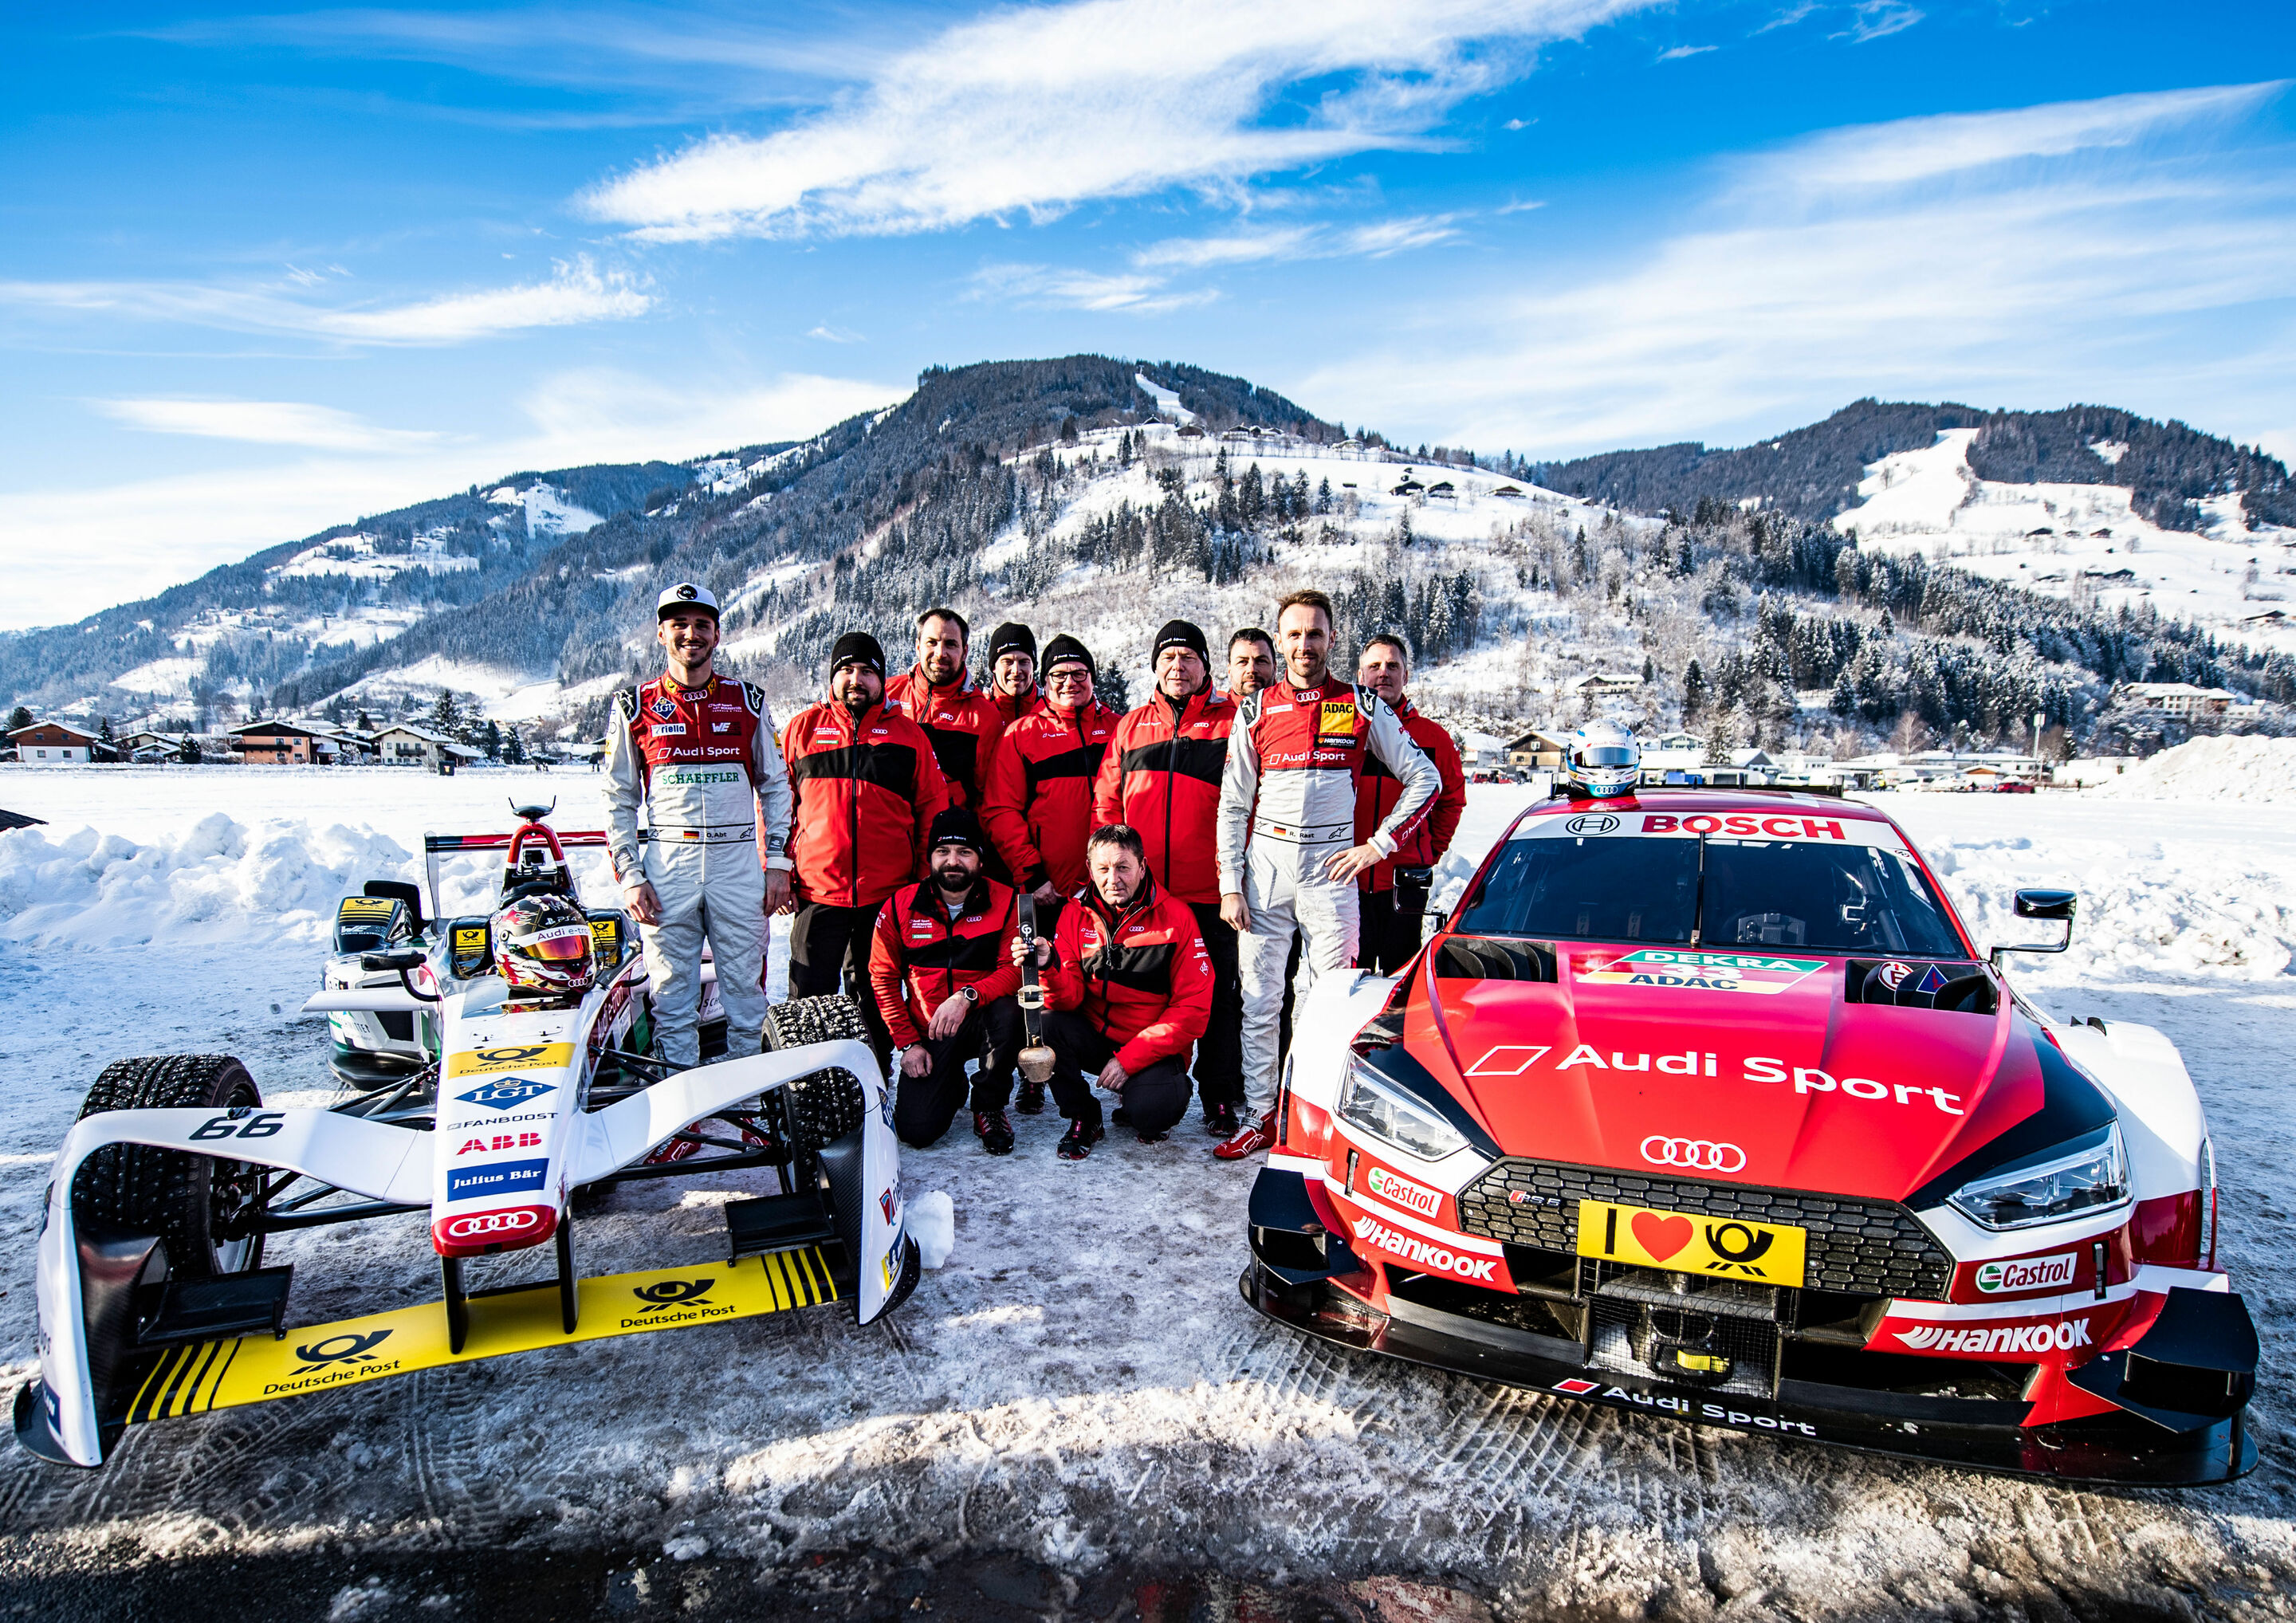 GP Ice Race 2019, Zell am See